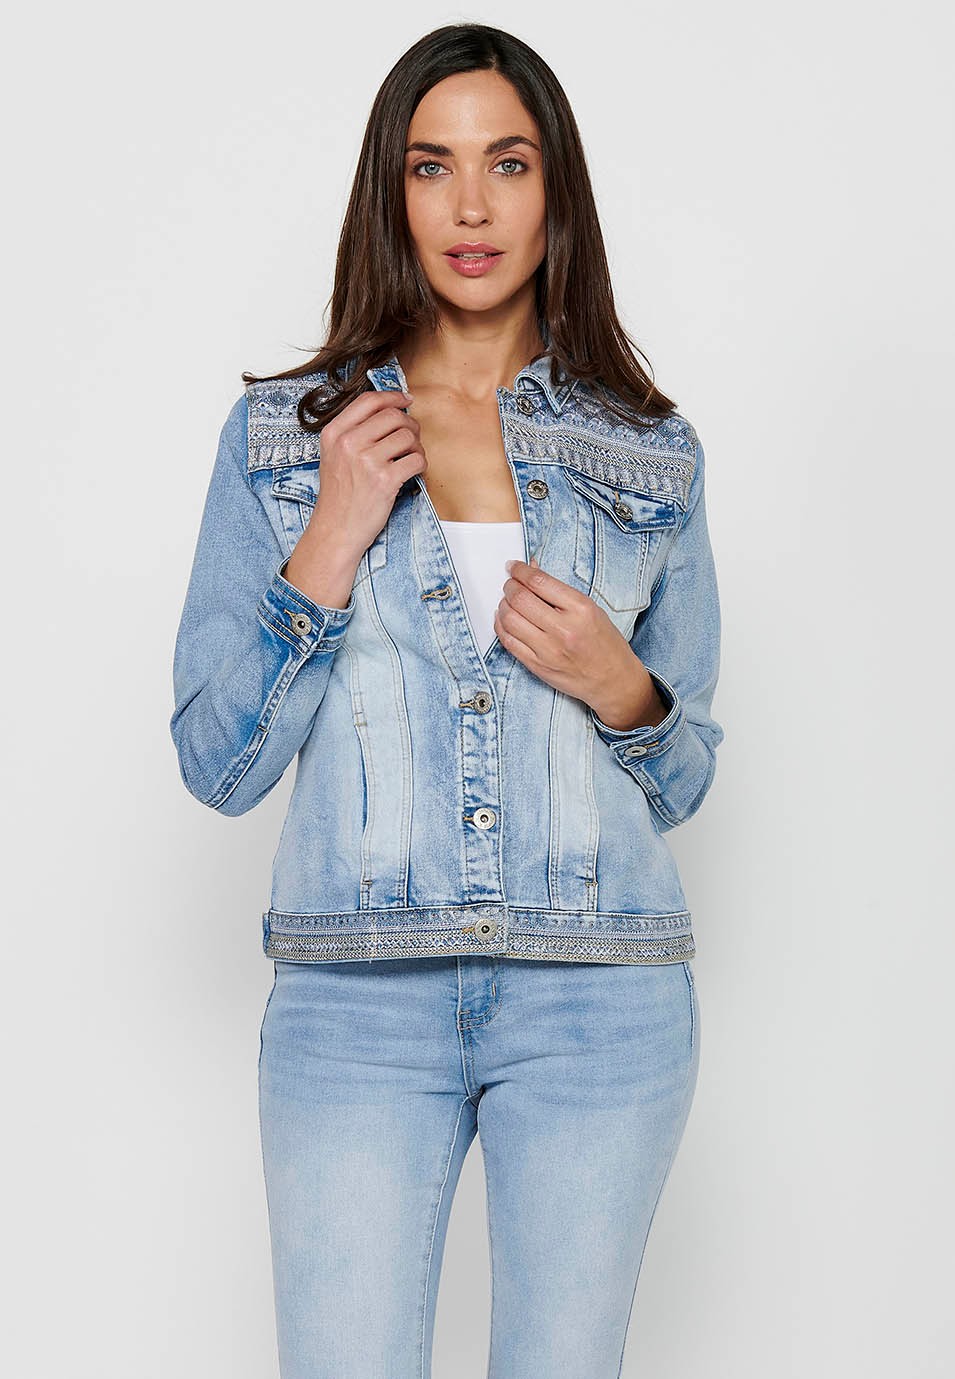 Denim jacket with front closure with buttons and shirt collar with pockets and embroidered details in light blue for women